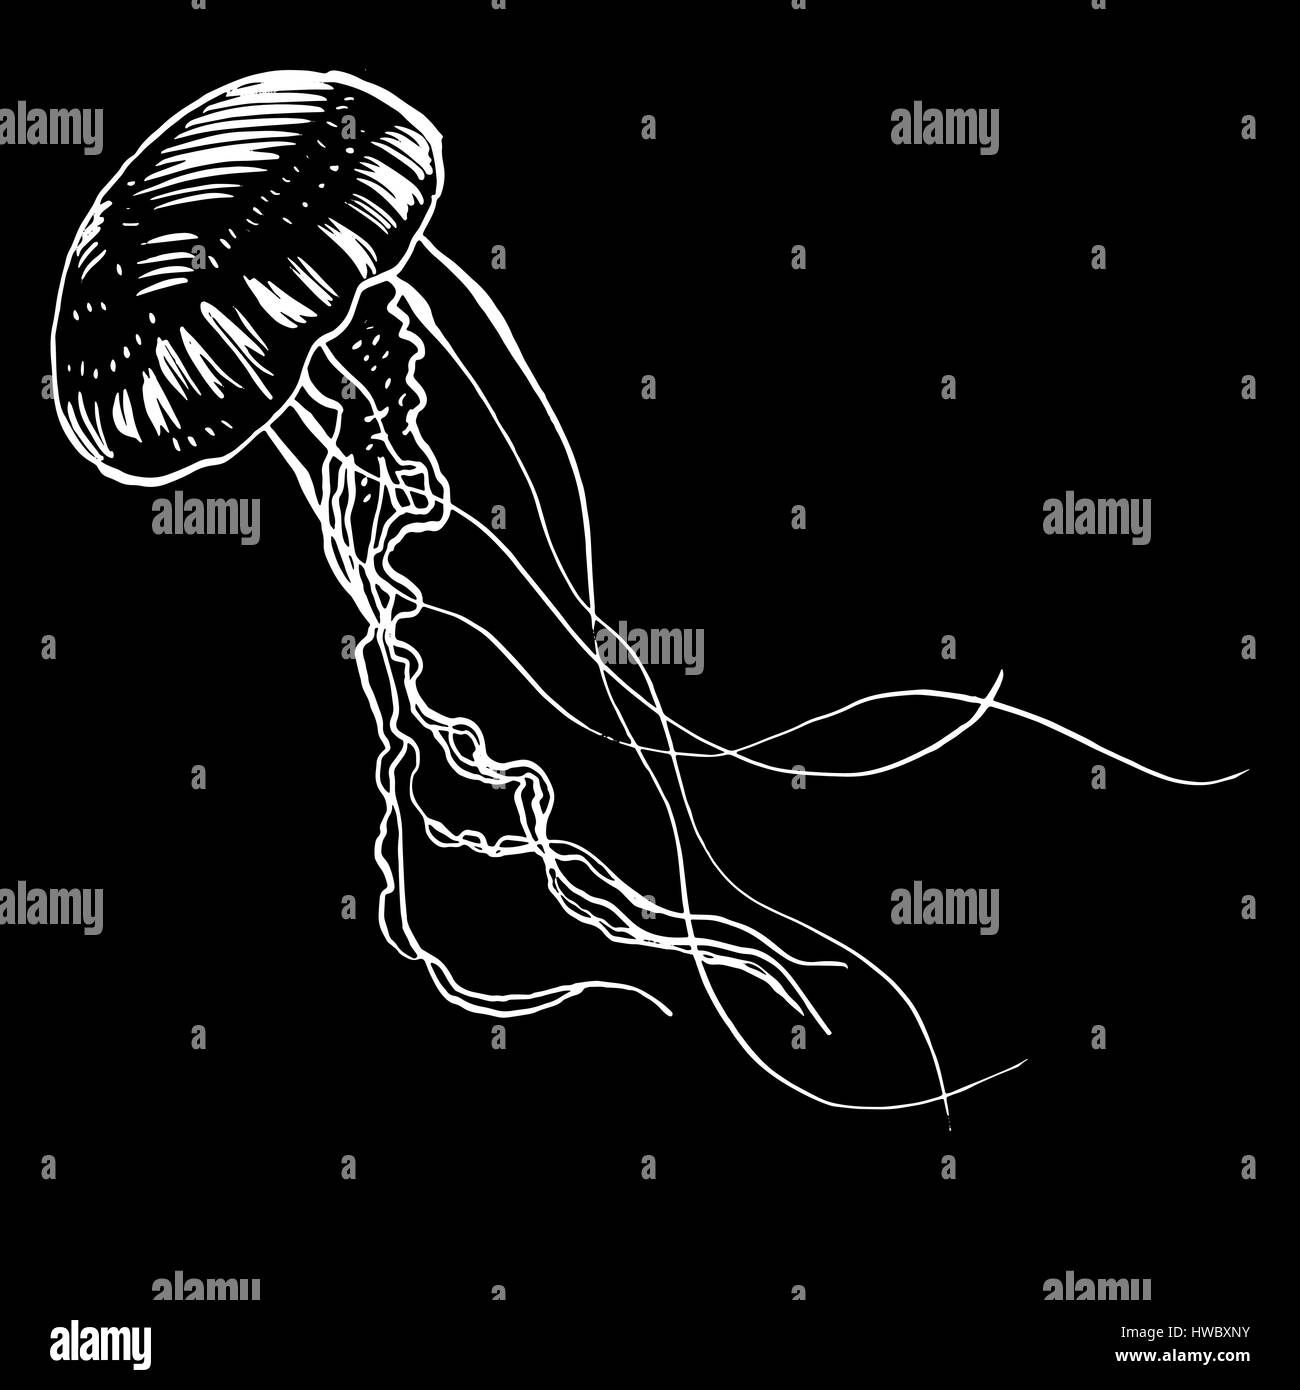 Jelly Fish Black And White Stock Photos Images Alamy